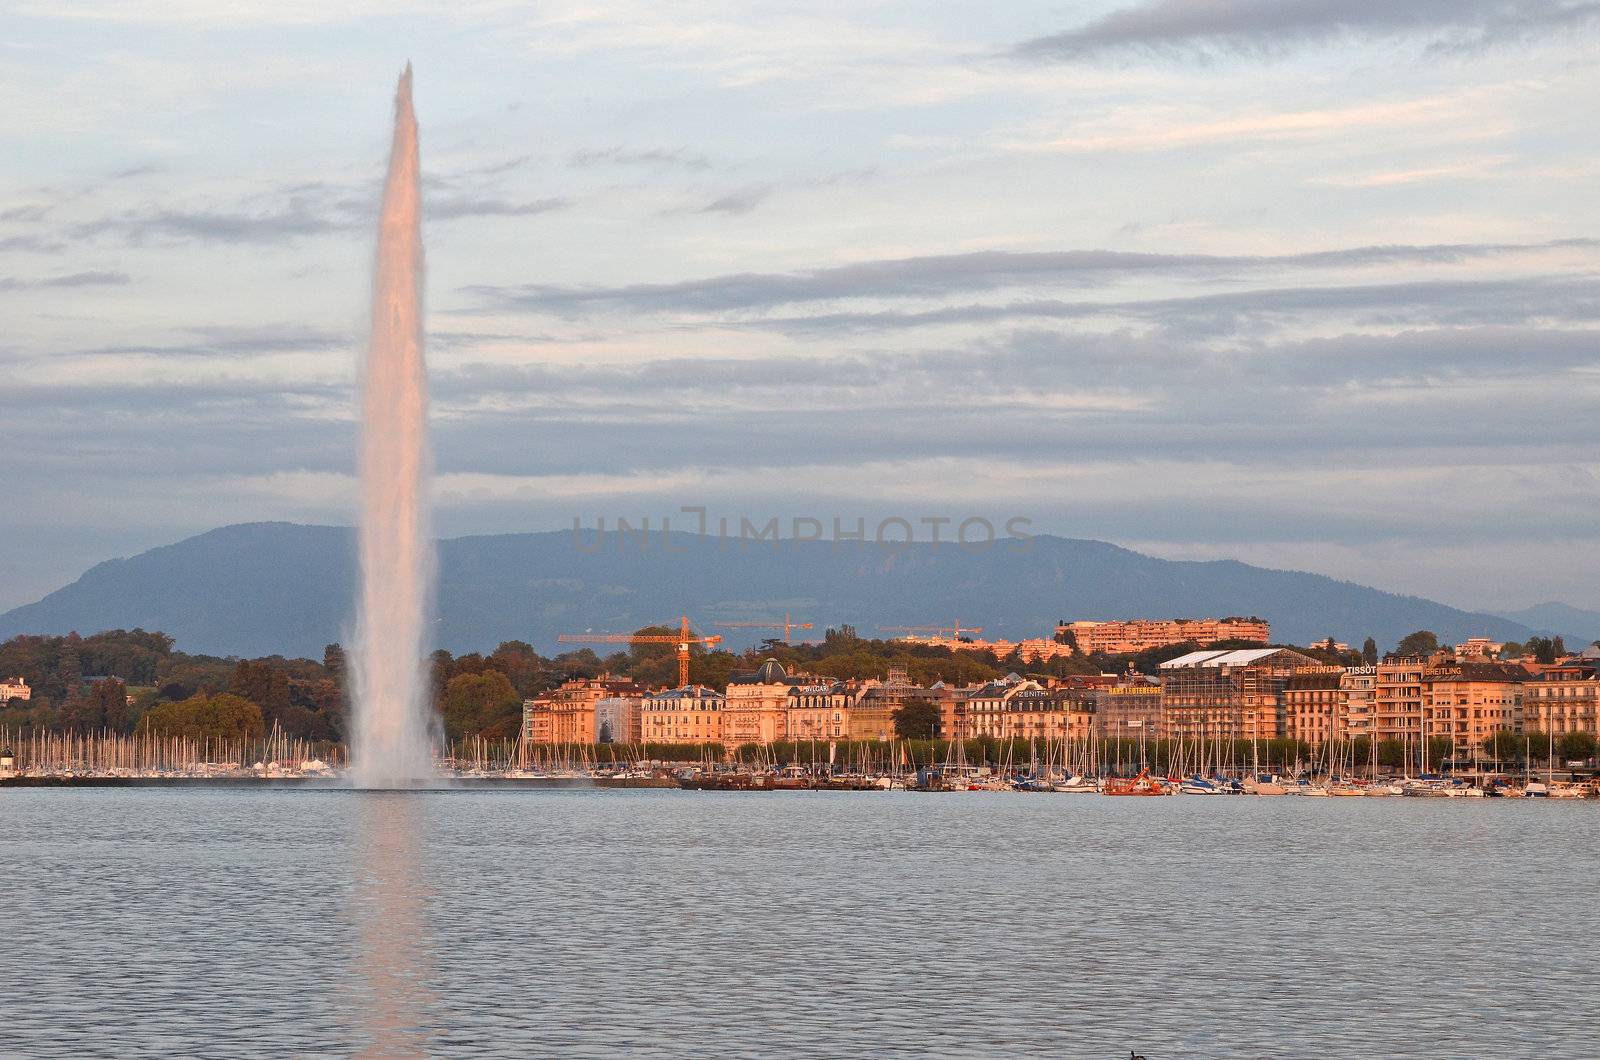 View over Lake Geneva in Switzerland. To the left is the powerful jet of water 'jet d eau".